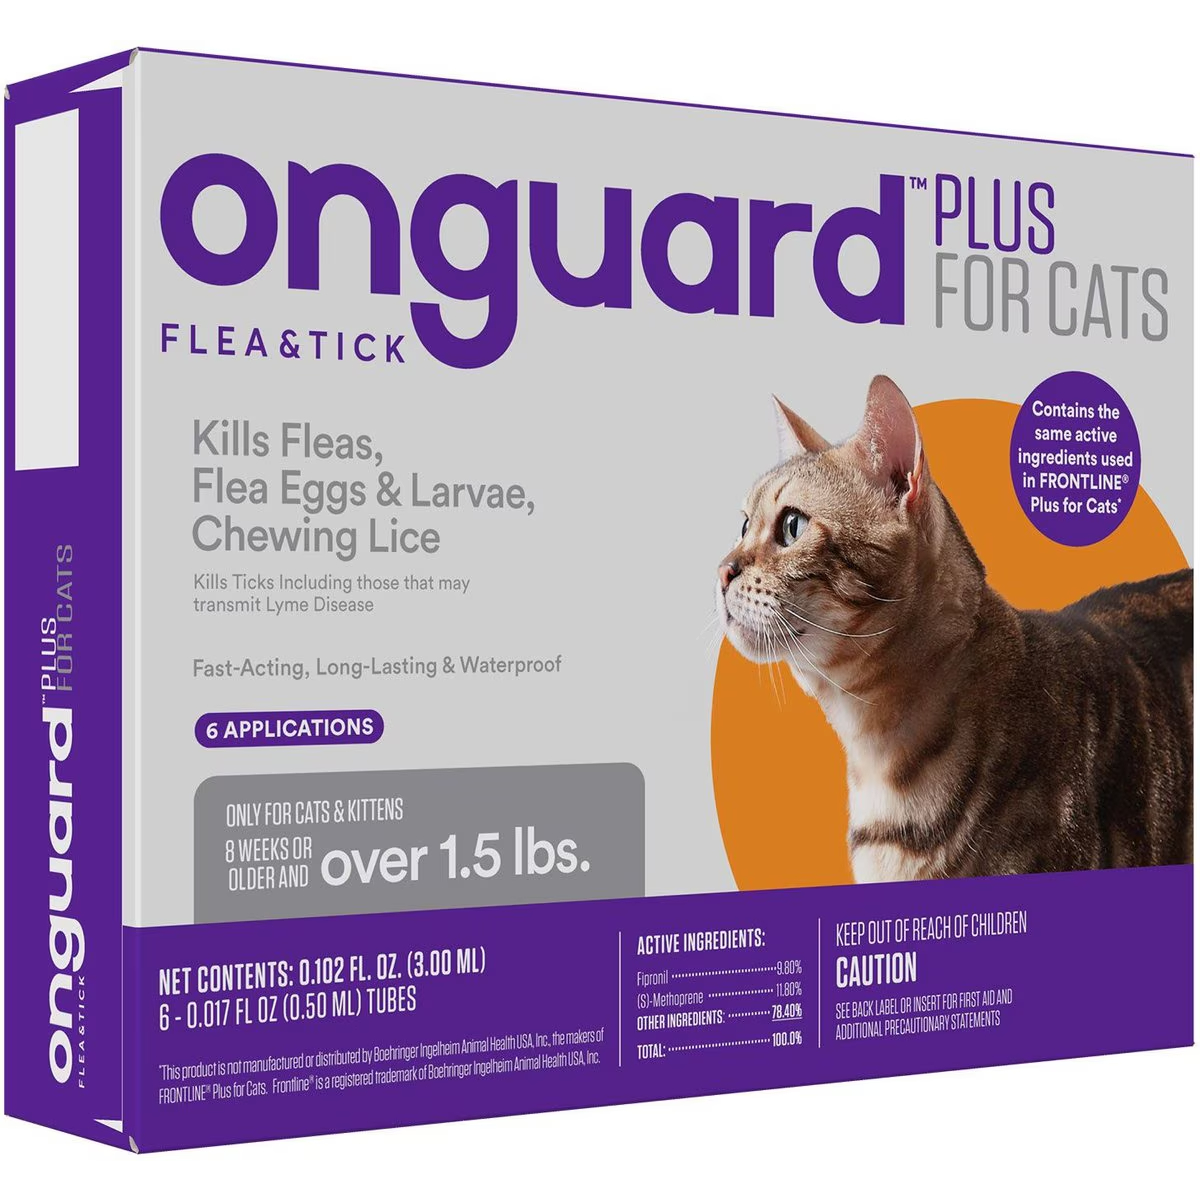 Onguard Plus Flea & Tick Spot Treatment for Cats, over 1.5 lbs new